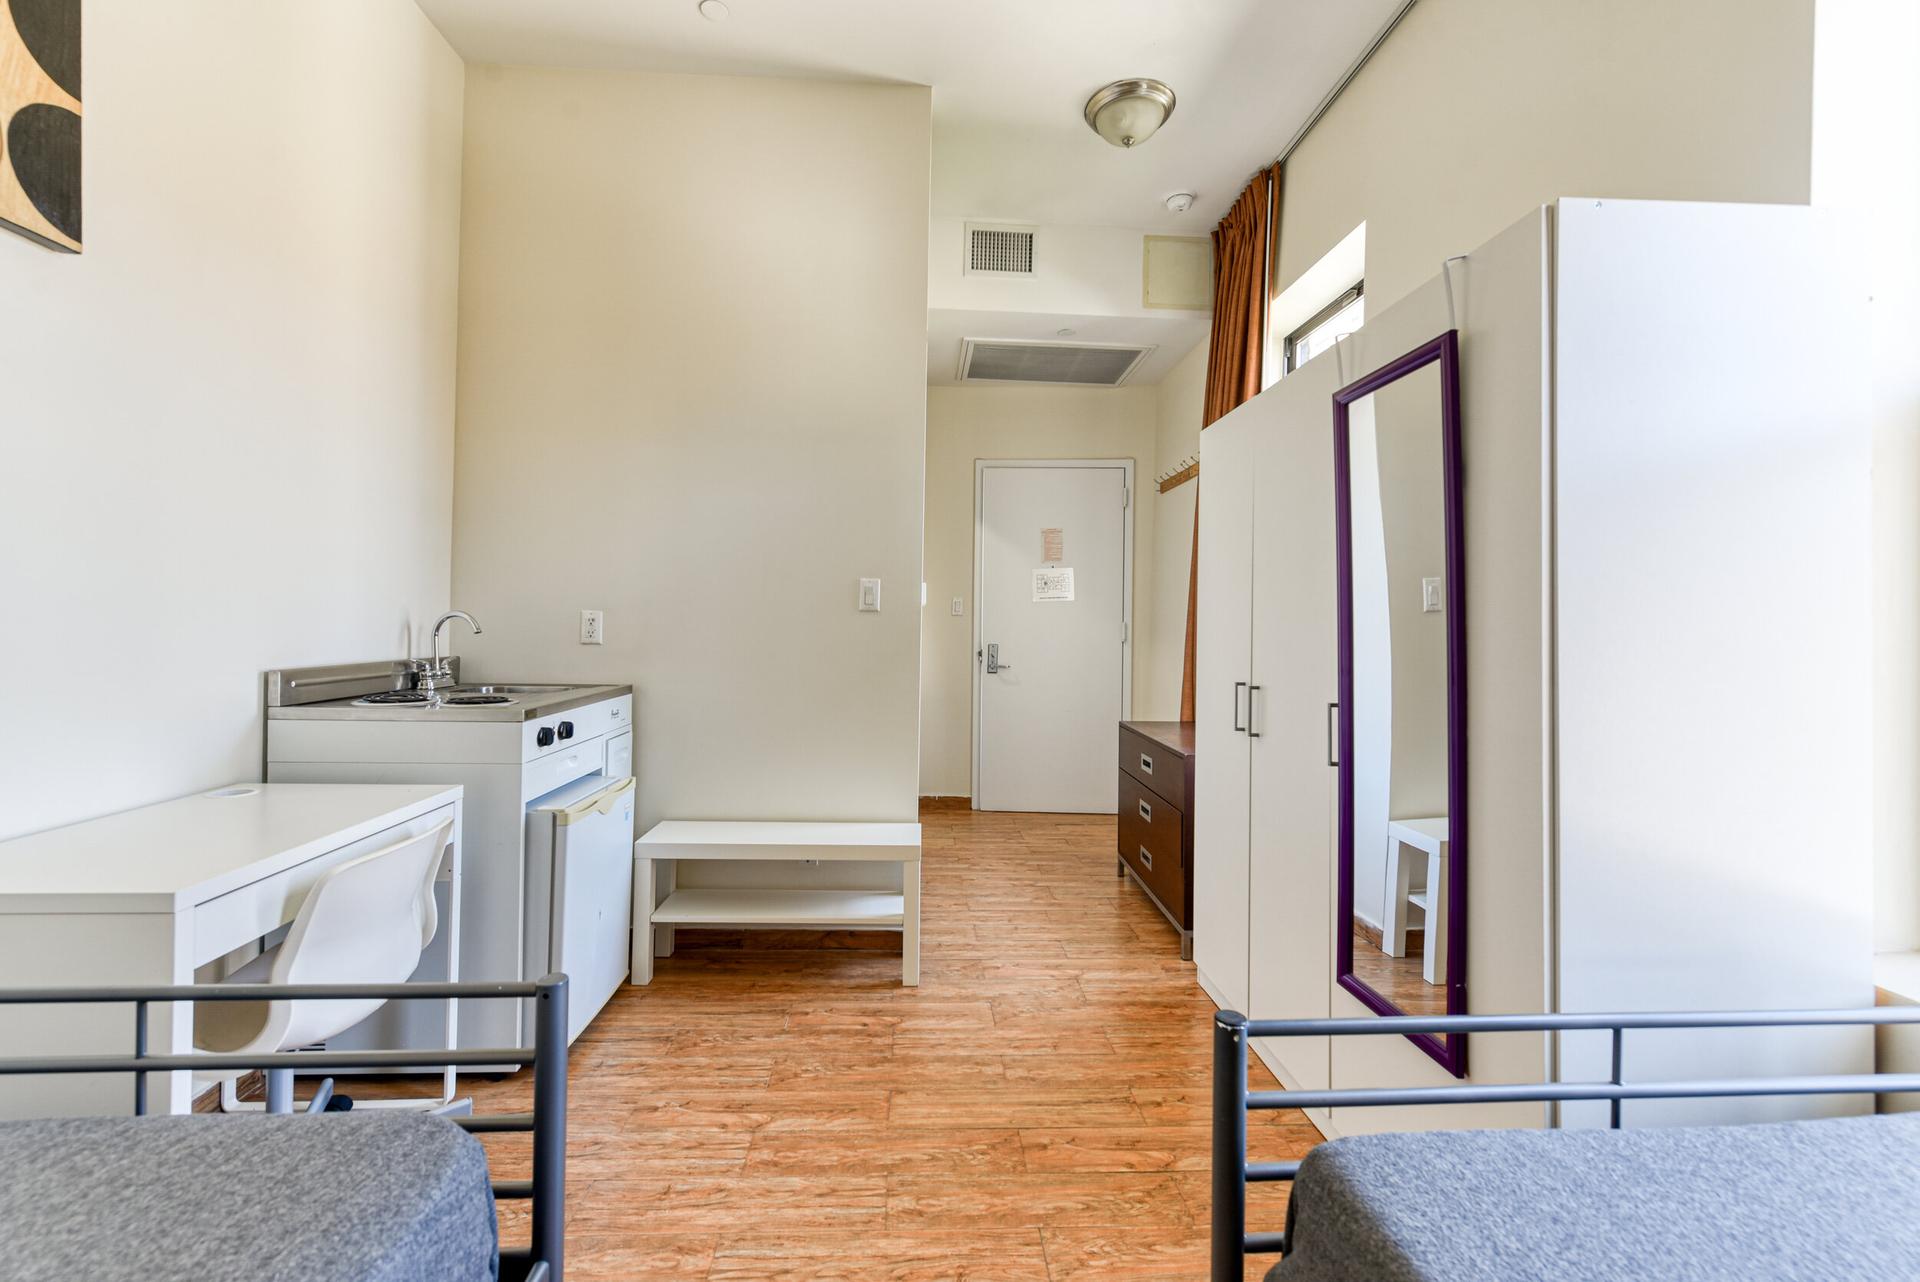 Cheap Classic 8 apartment for students in Brooklyn